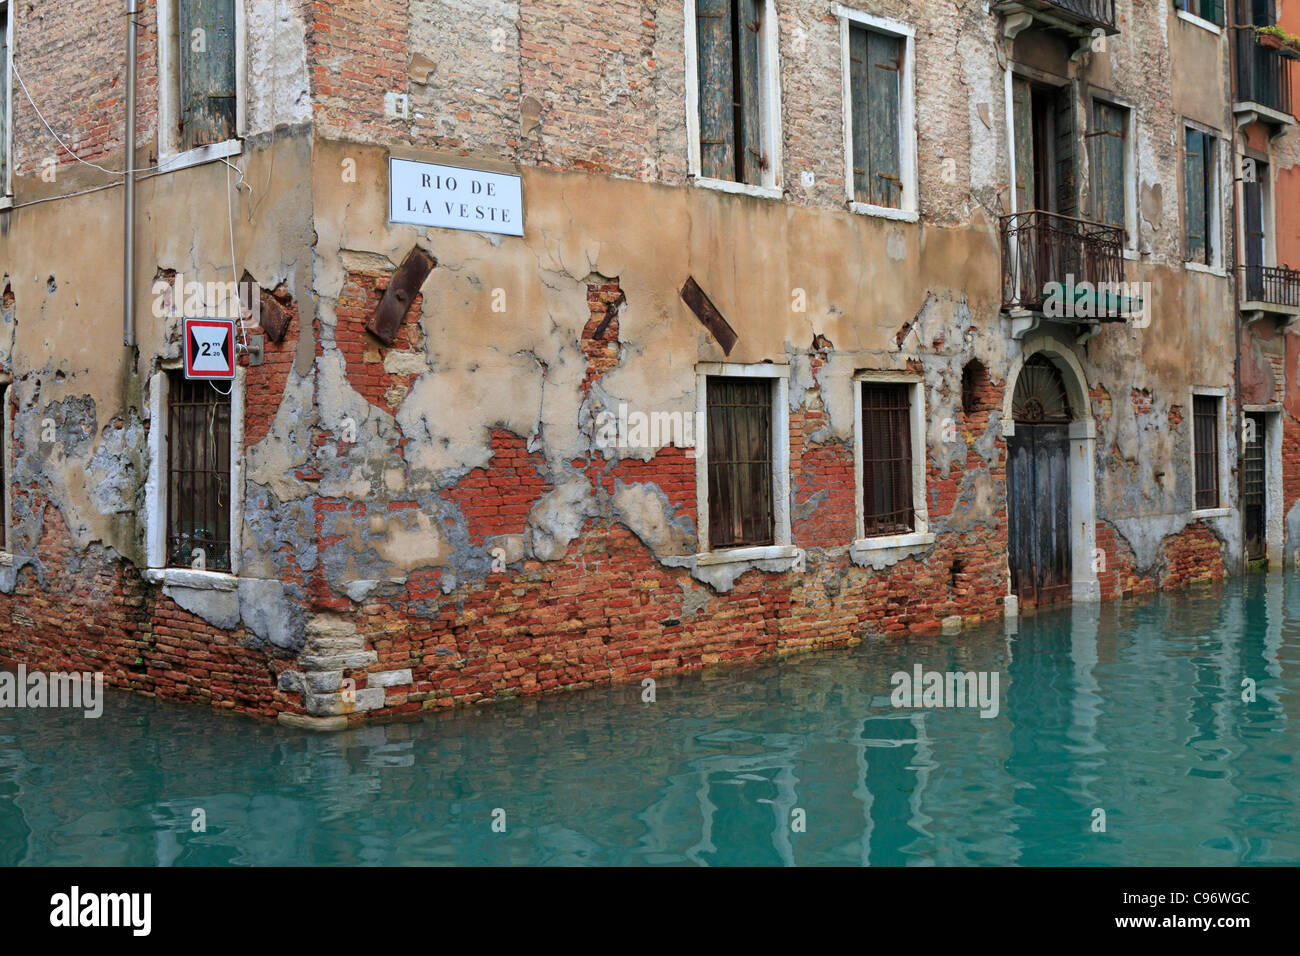 Decay and dereliction on the canals of Venice, Italy, Europe. Stock Photo